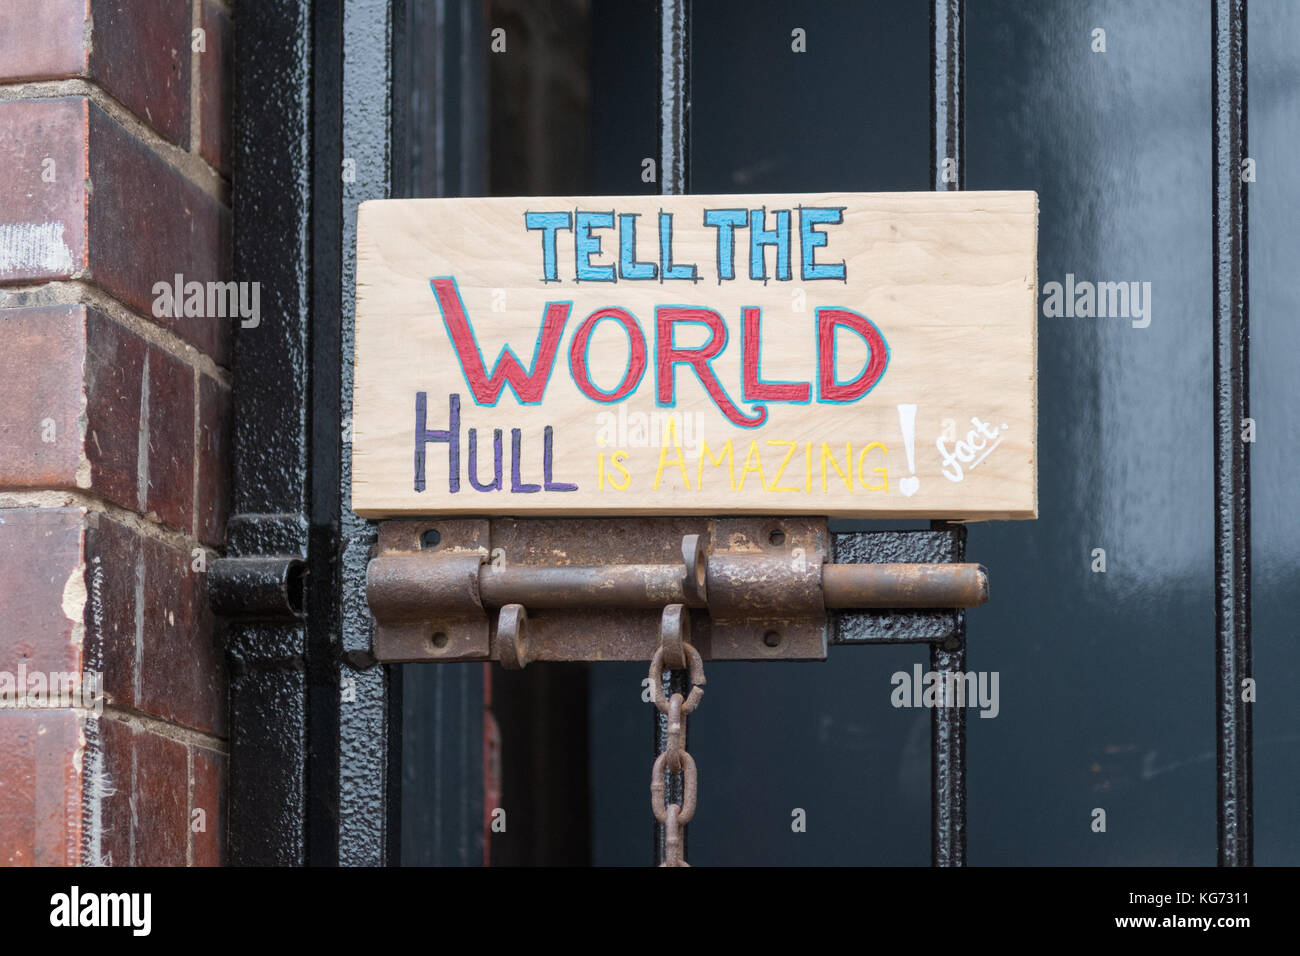 Hull UK City of Culture 2017 - Tell the World Hull is Amazing Zeichen in Hull Fruit Market Stockfoto